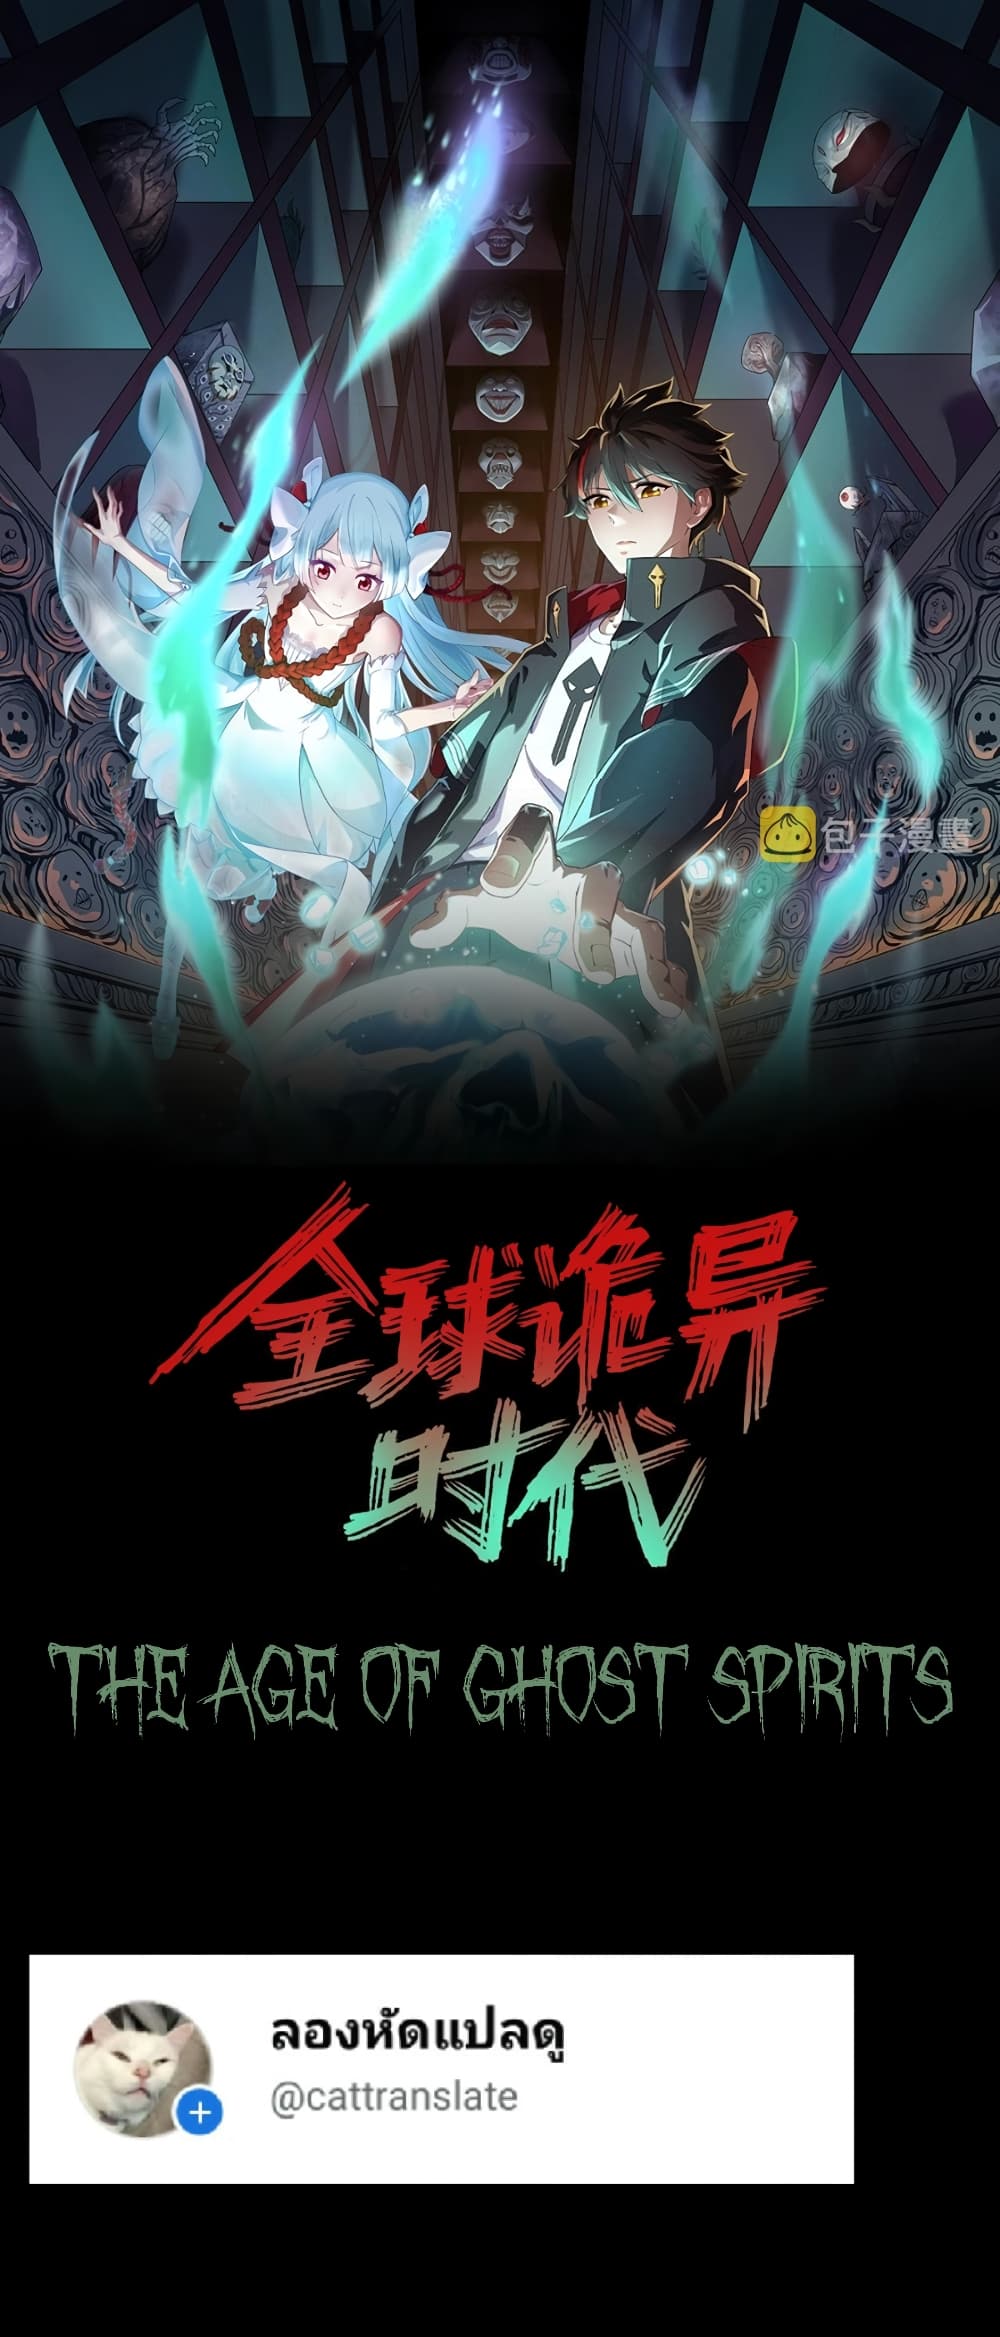 The Age of Ghost Spirits à¸à¸­à¸à¸à¸µà¹ 22 (1)